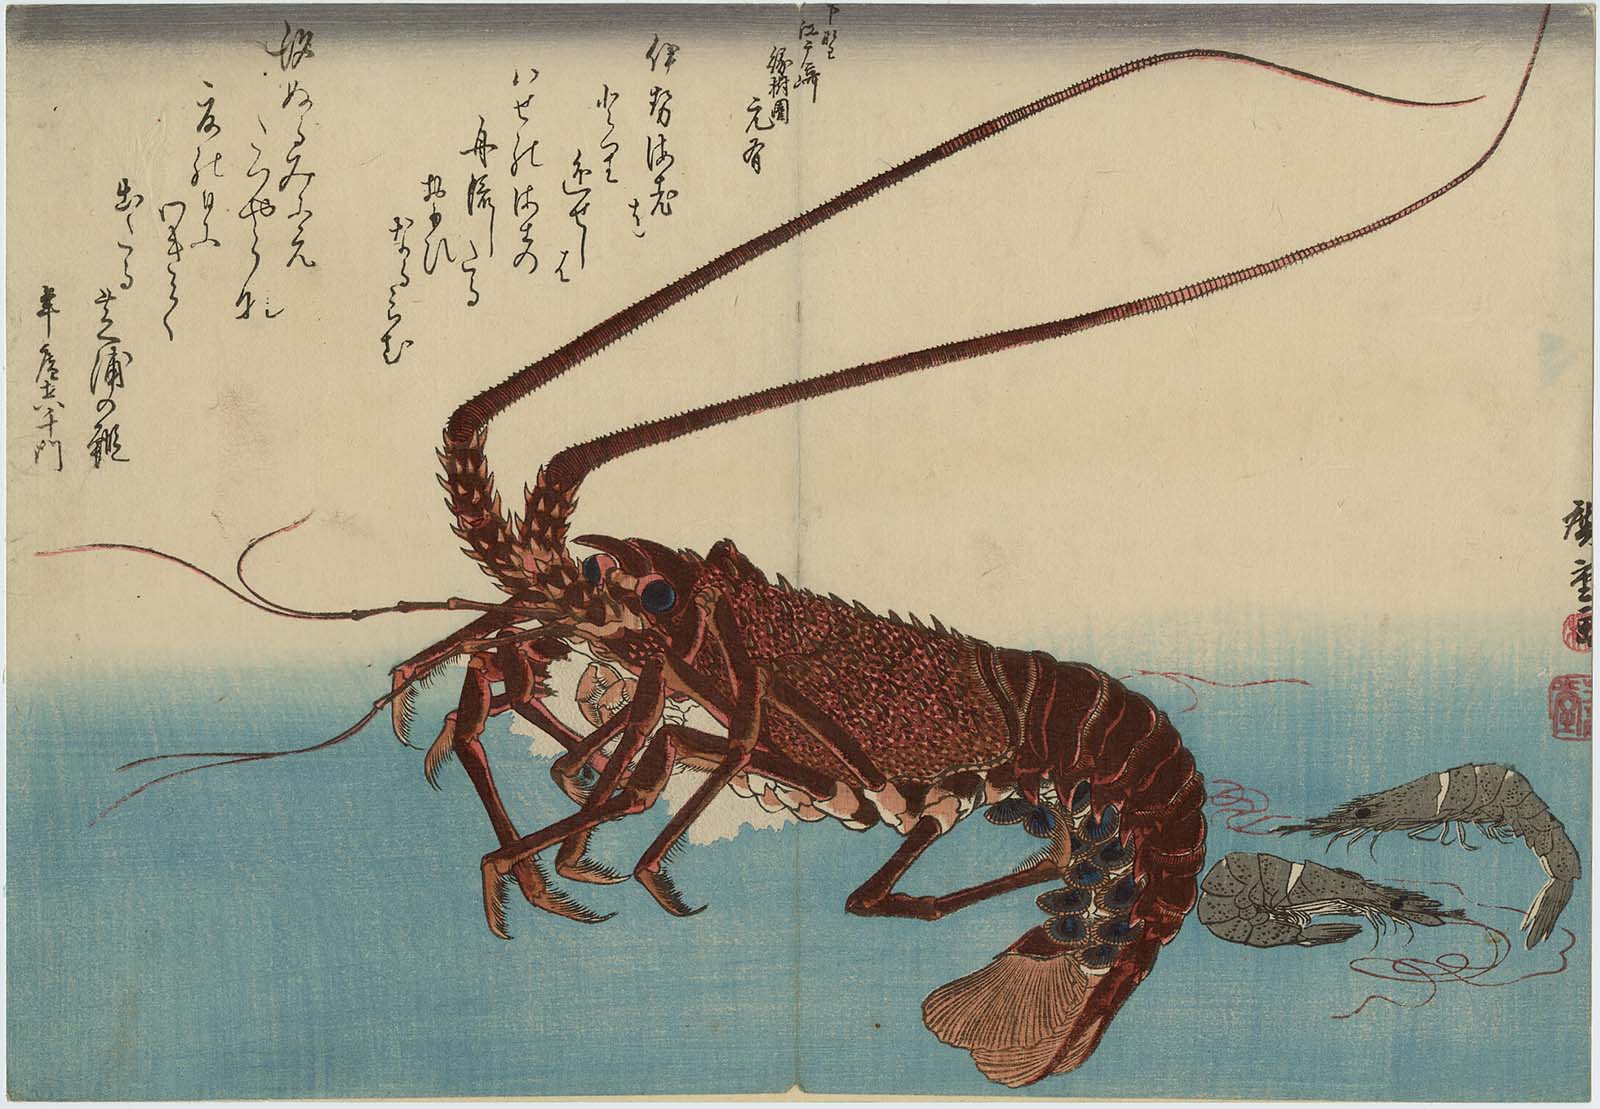 Japanese artwork depicting a Lobster and some shrimps. These are some of the crustaceans used to make Chitosan. Image via Museum of Fine Arts.